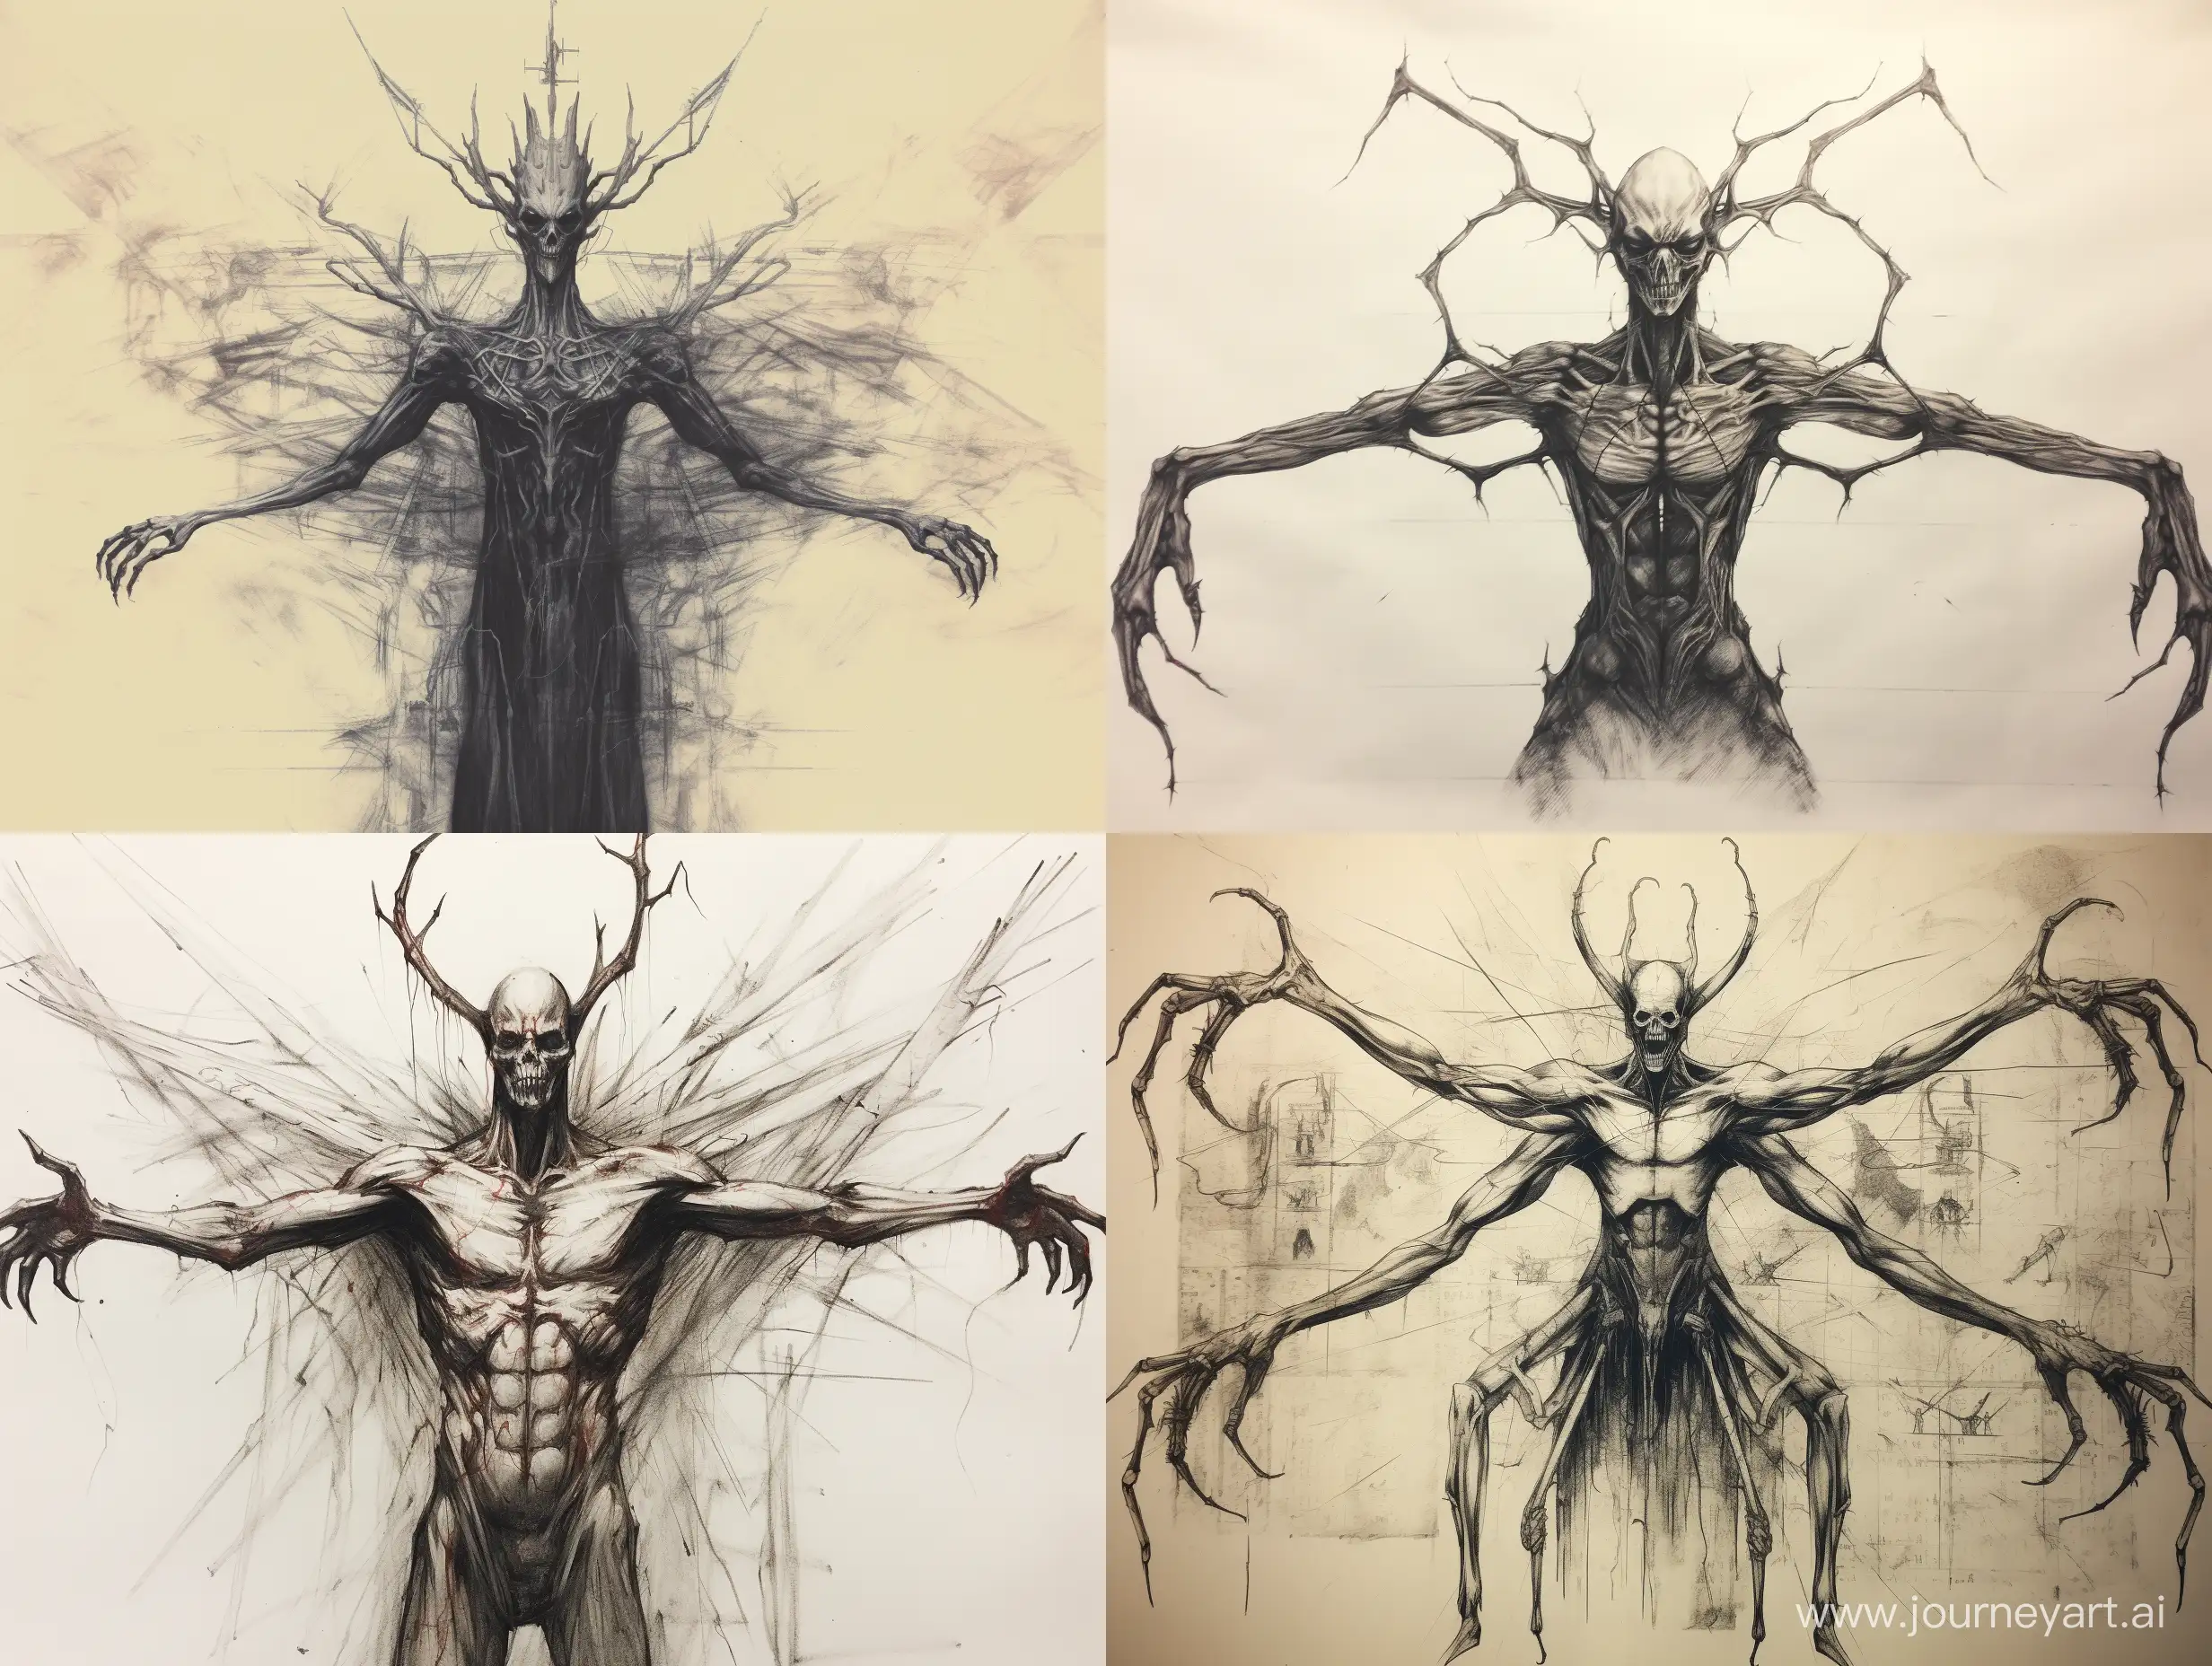 Multilimbed-Tall-Humanoid-Creature-Sketch-Unveiling-a-Mystical-Being-with-Six-Arms